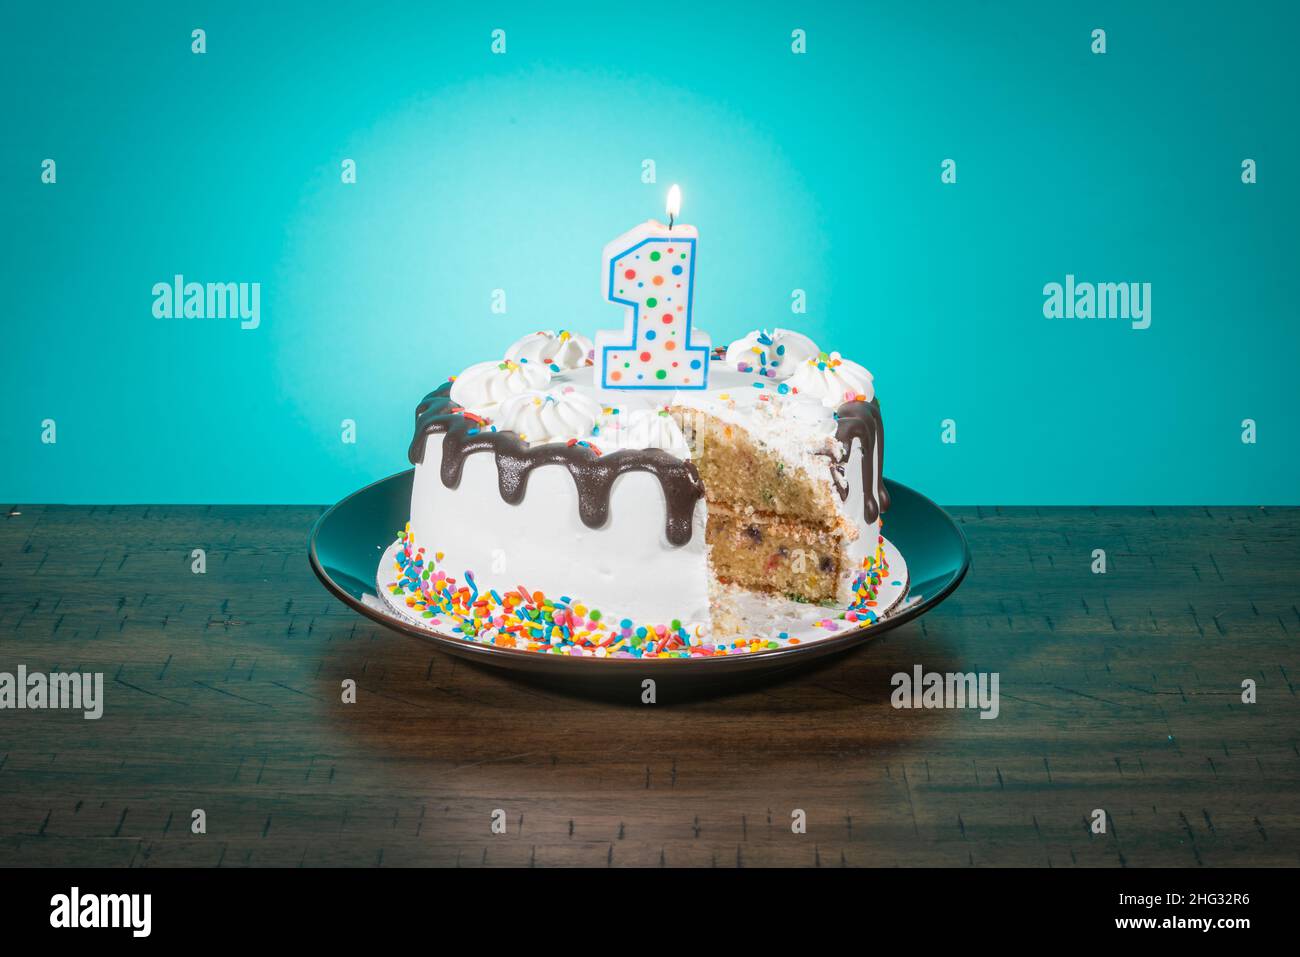 A birthday cake, missing a slice, bears a candle in the shape of the number 1. Stock Photo